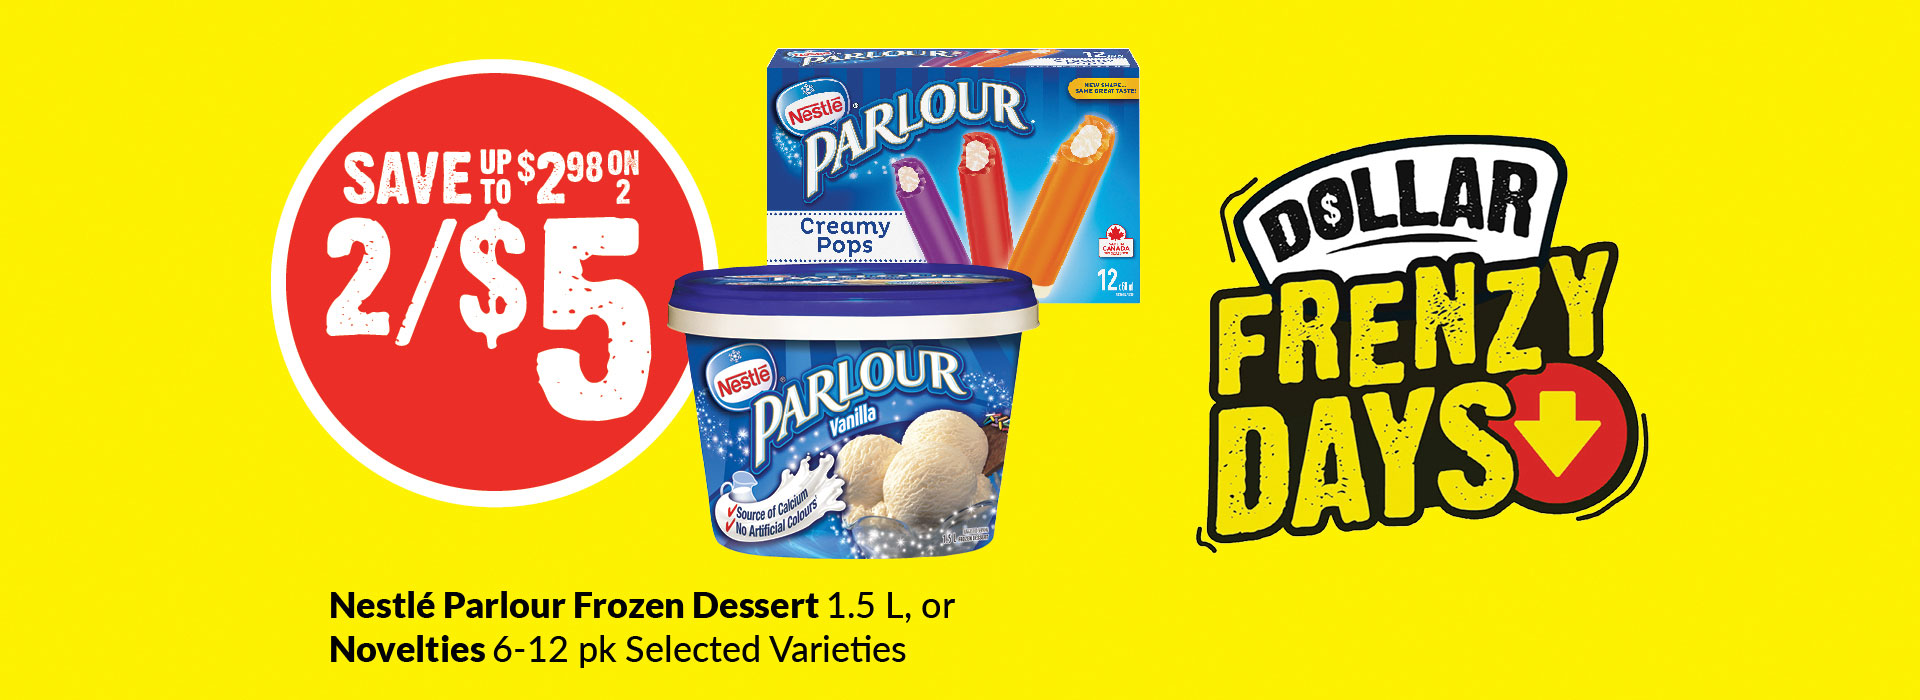 Text Reading 'Buy Nestle Parlour Frozen Dessert 1.5 litres or Novelties 6-12 packs on selected varieties only at $5 for two and save up to $2.98 on two.'